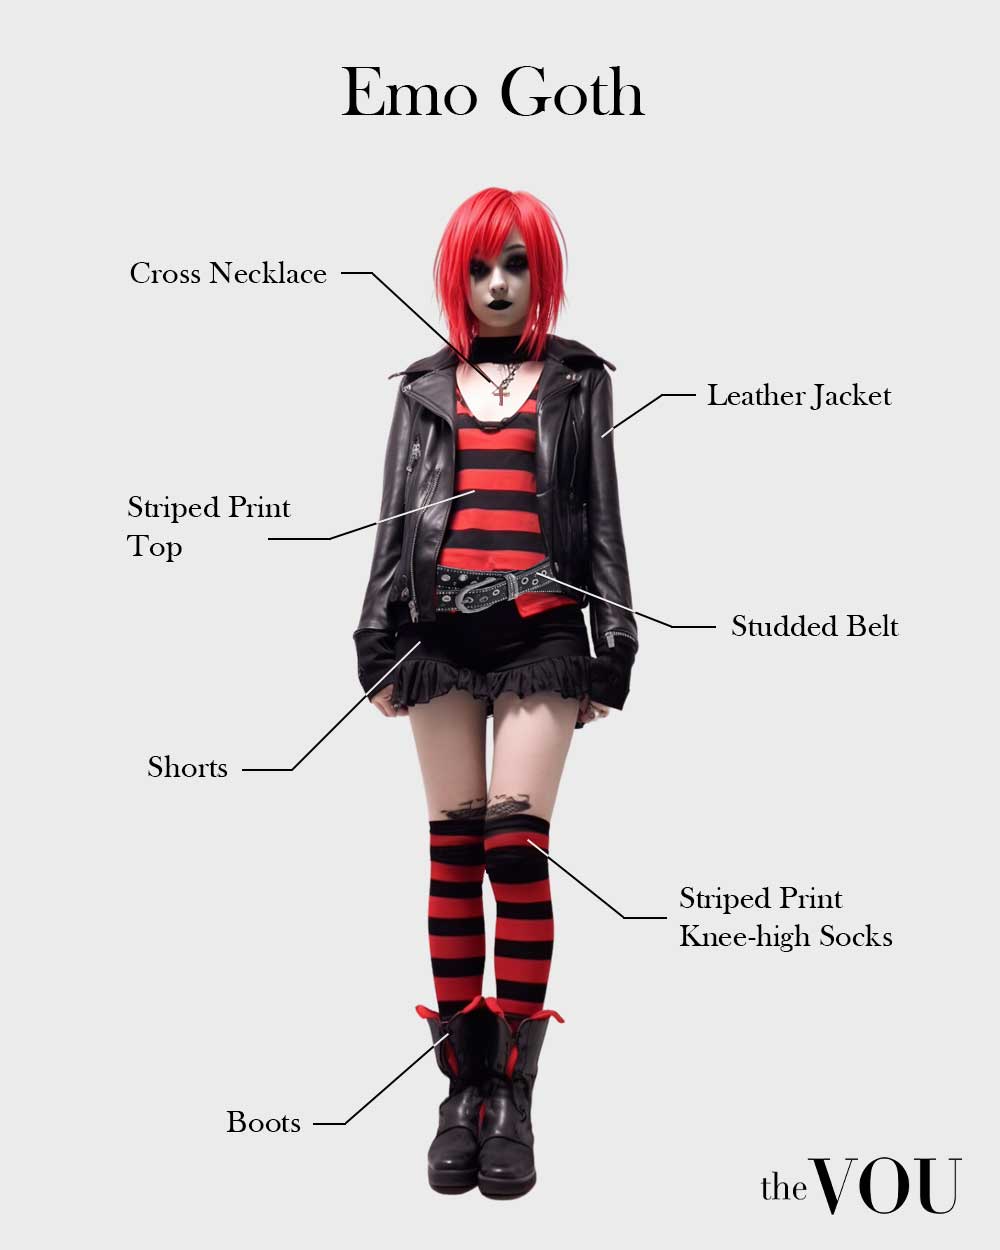 Emo goth outfit elements